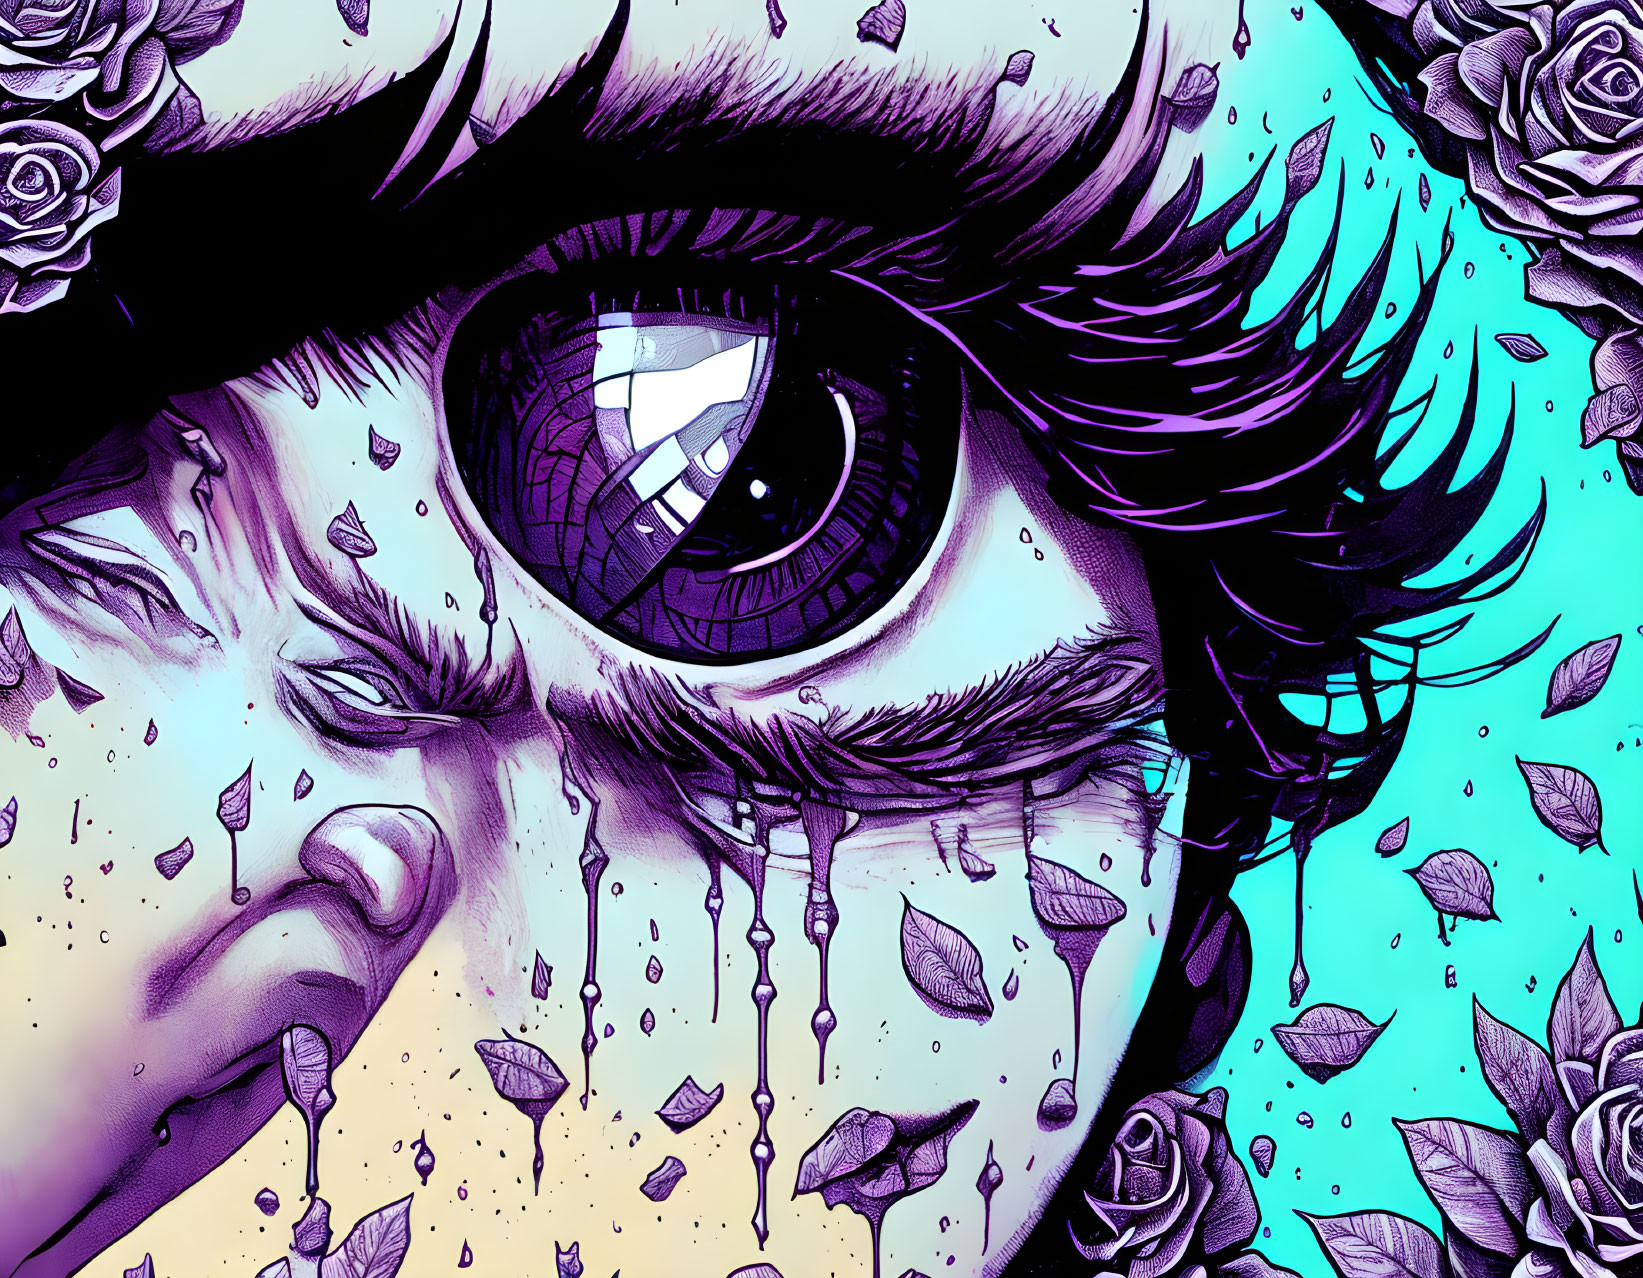 Intense gaze artwork with purple hues and roses, detailed eye and teardrops